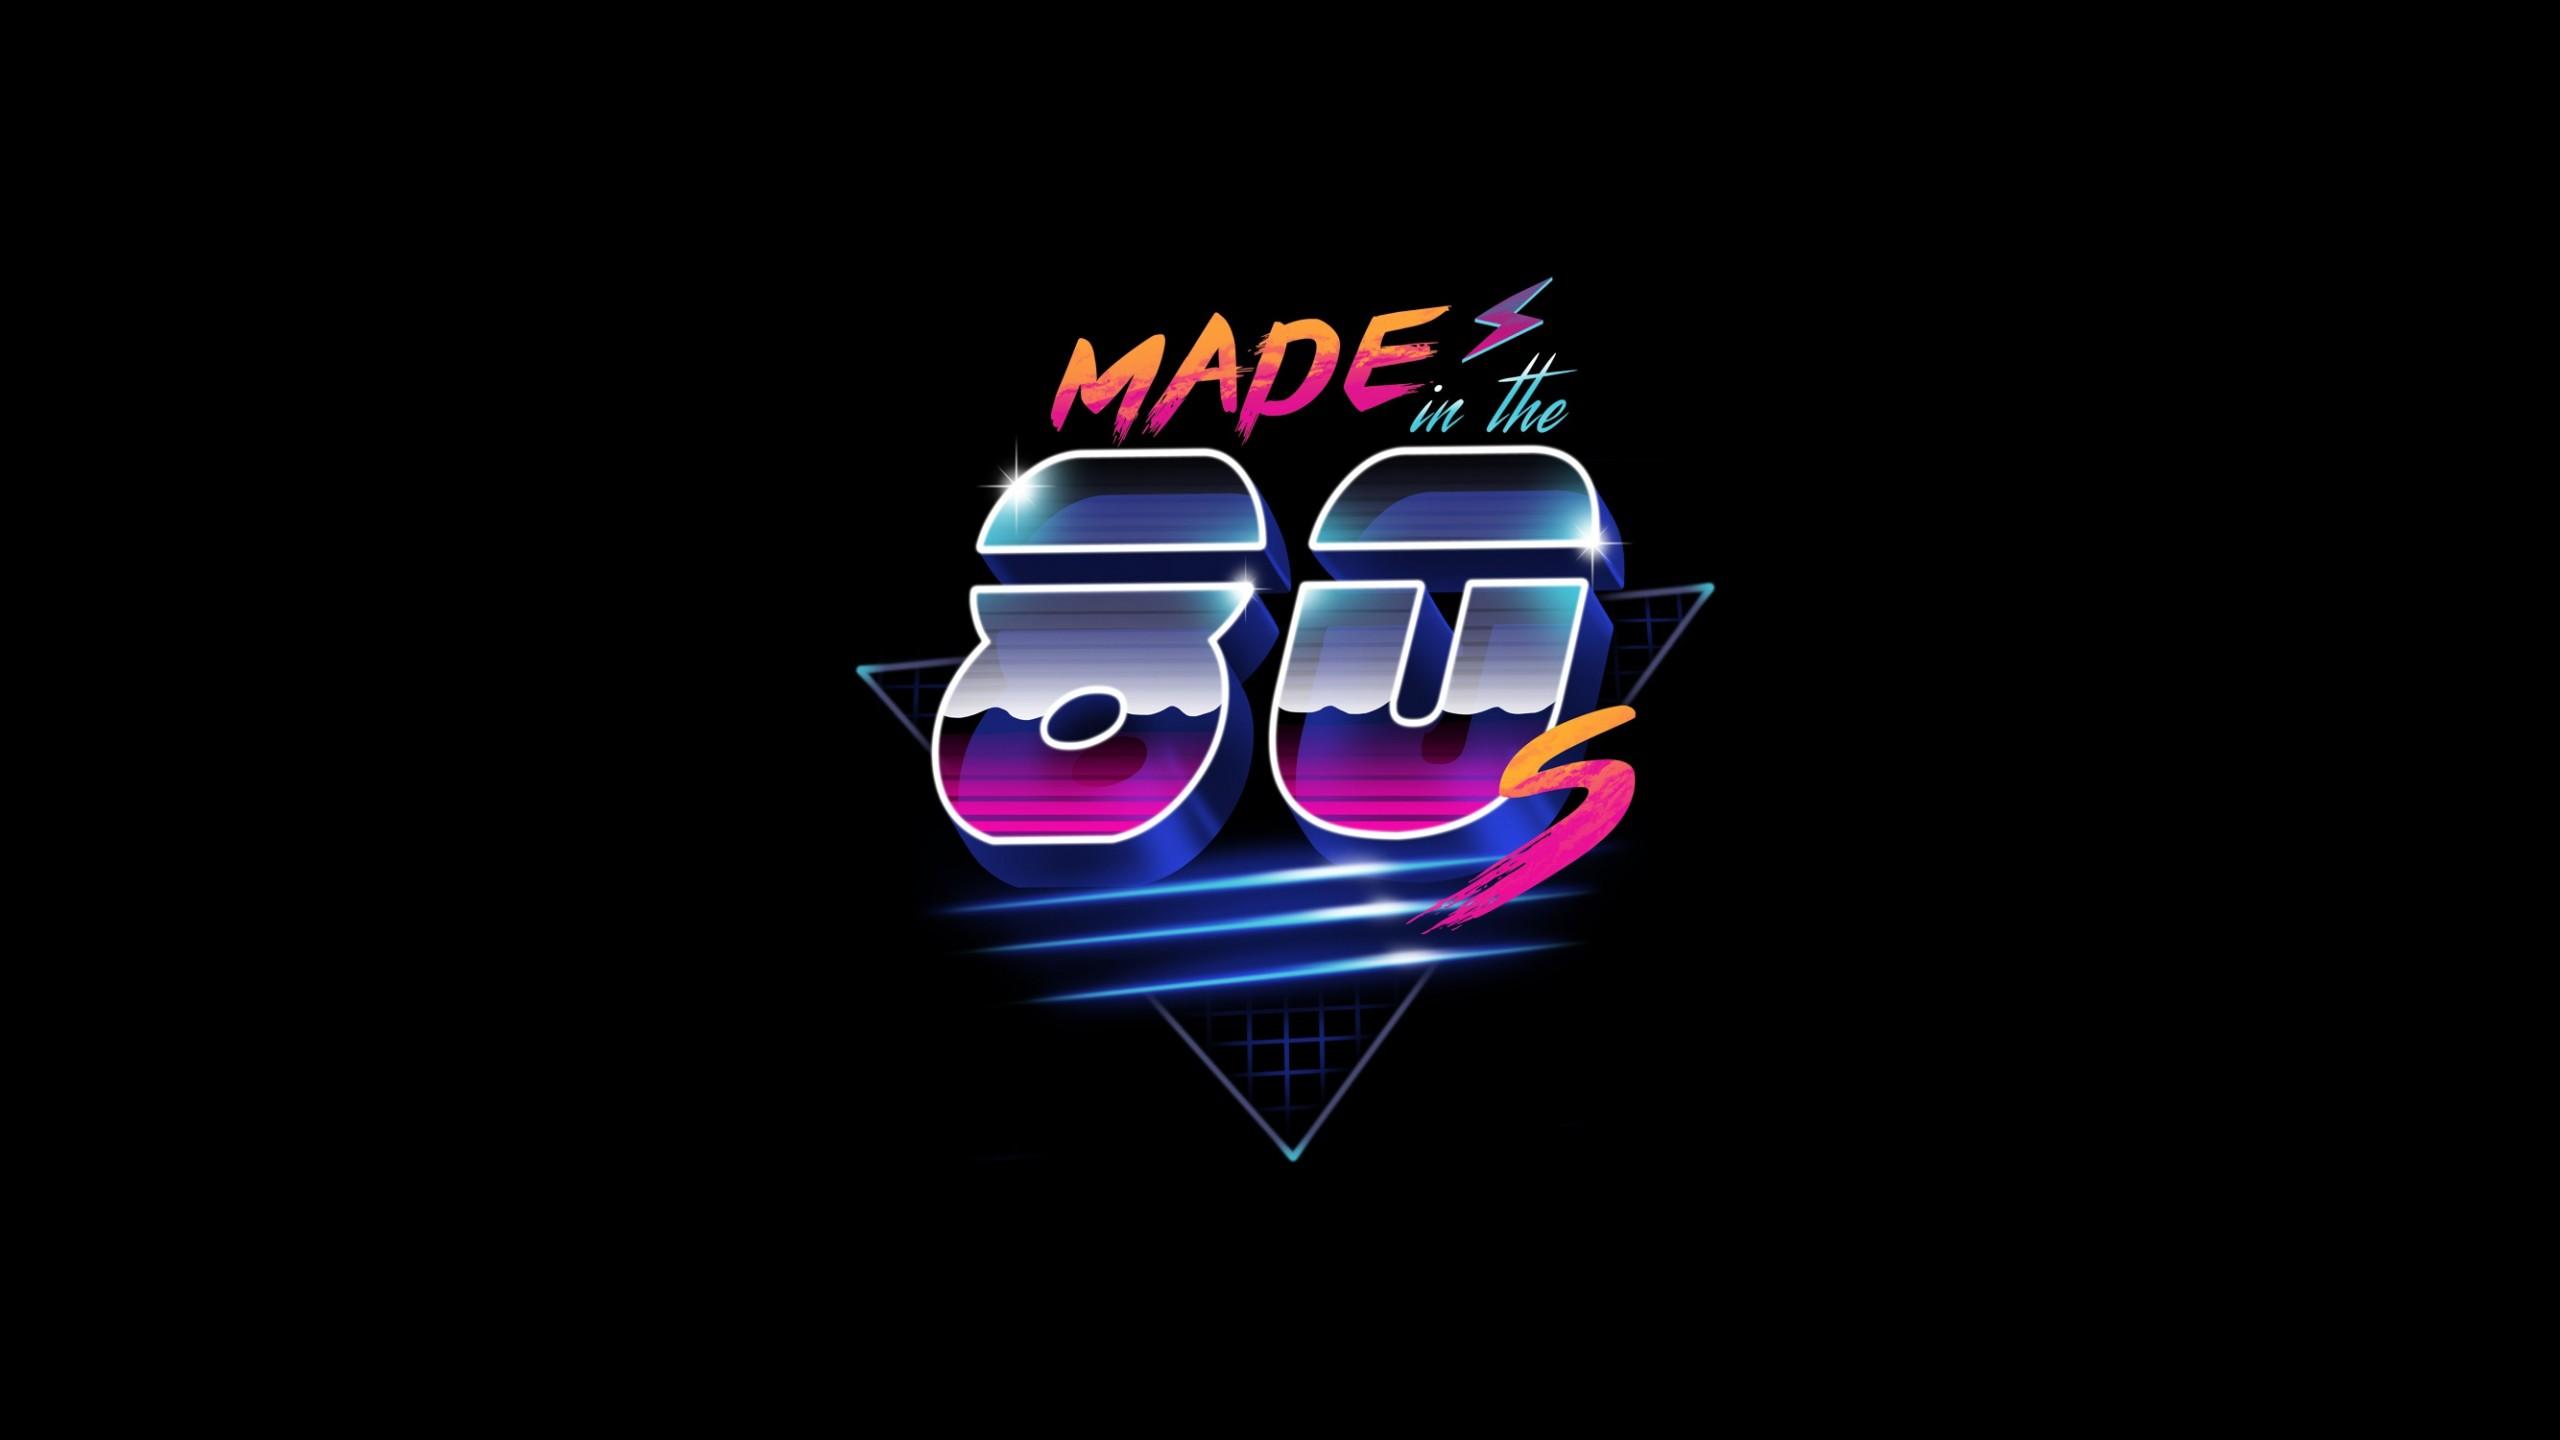 Wallpaper Made In 80s, Neon, Synthwave, Retrowave, HD, Black Dark,. Wallpaper For IPhone, Android, Mobile And Desktop